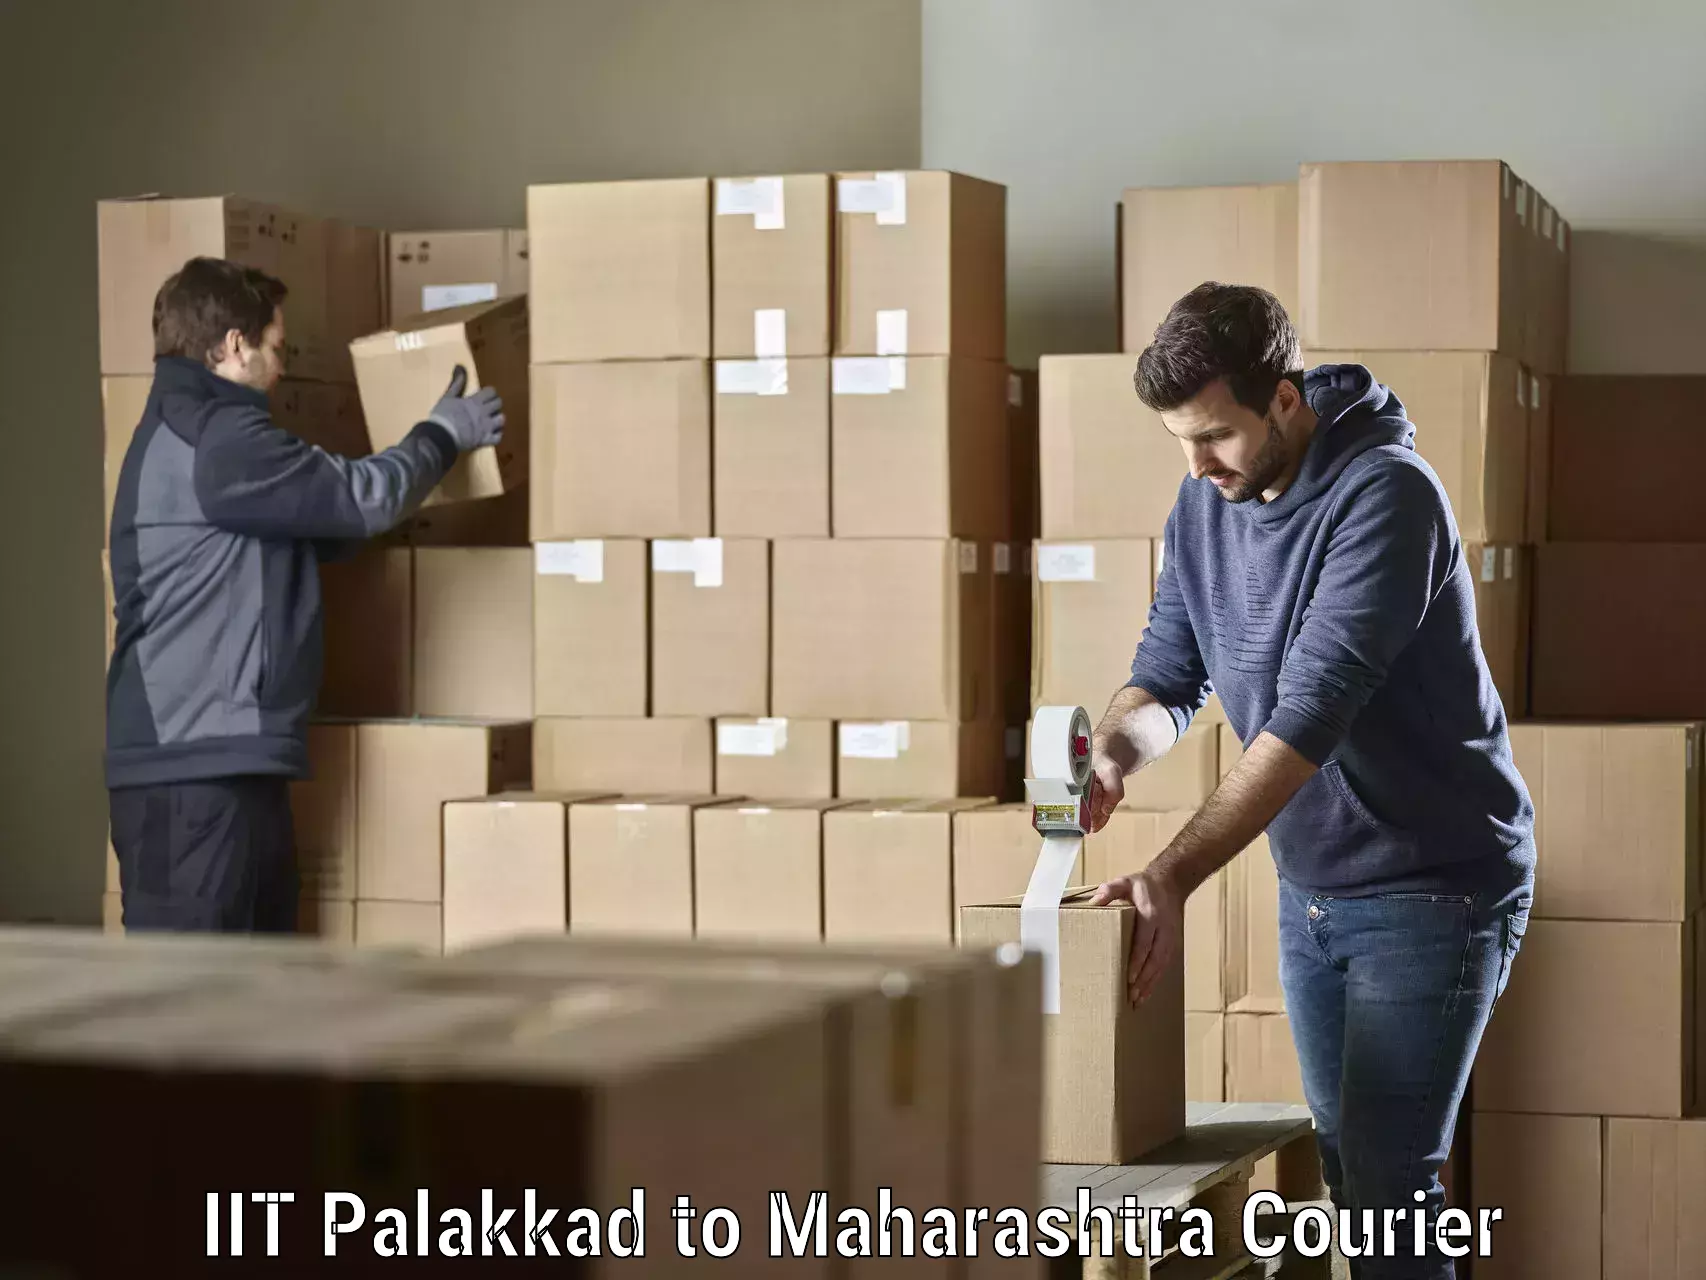 User-friendly courier app IIT Palakkad to Symbiosis International Pune